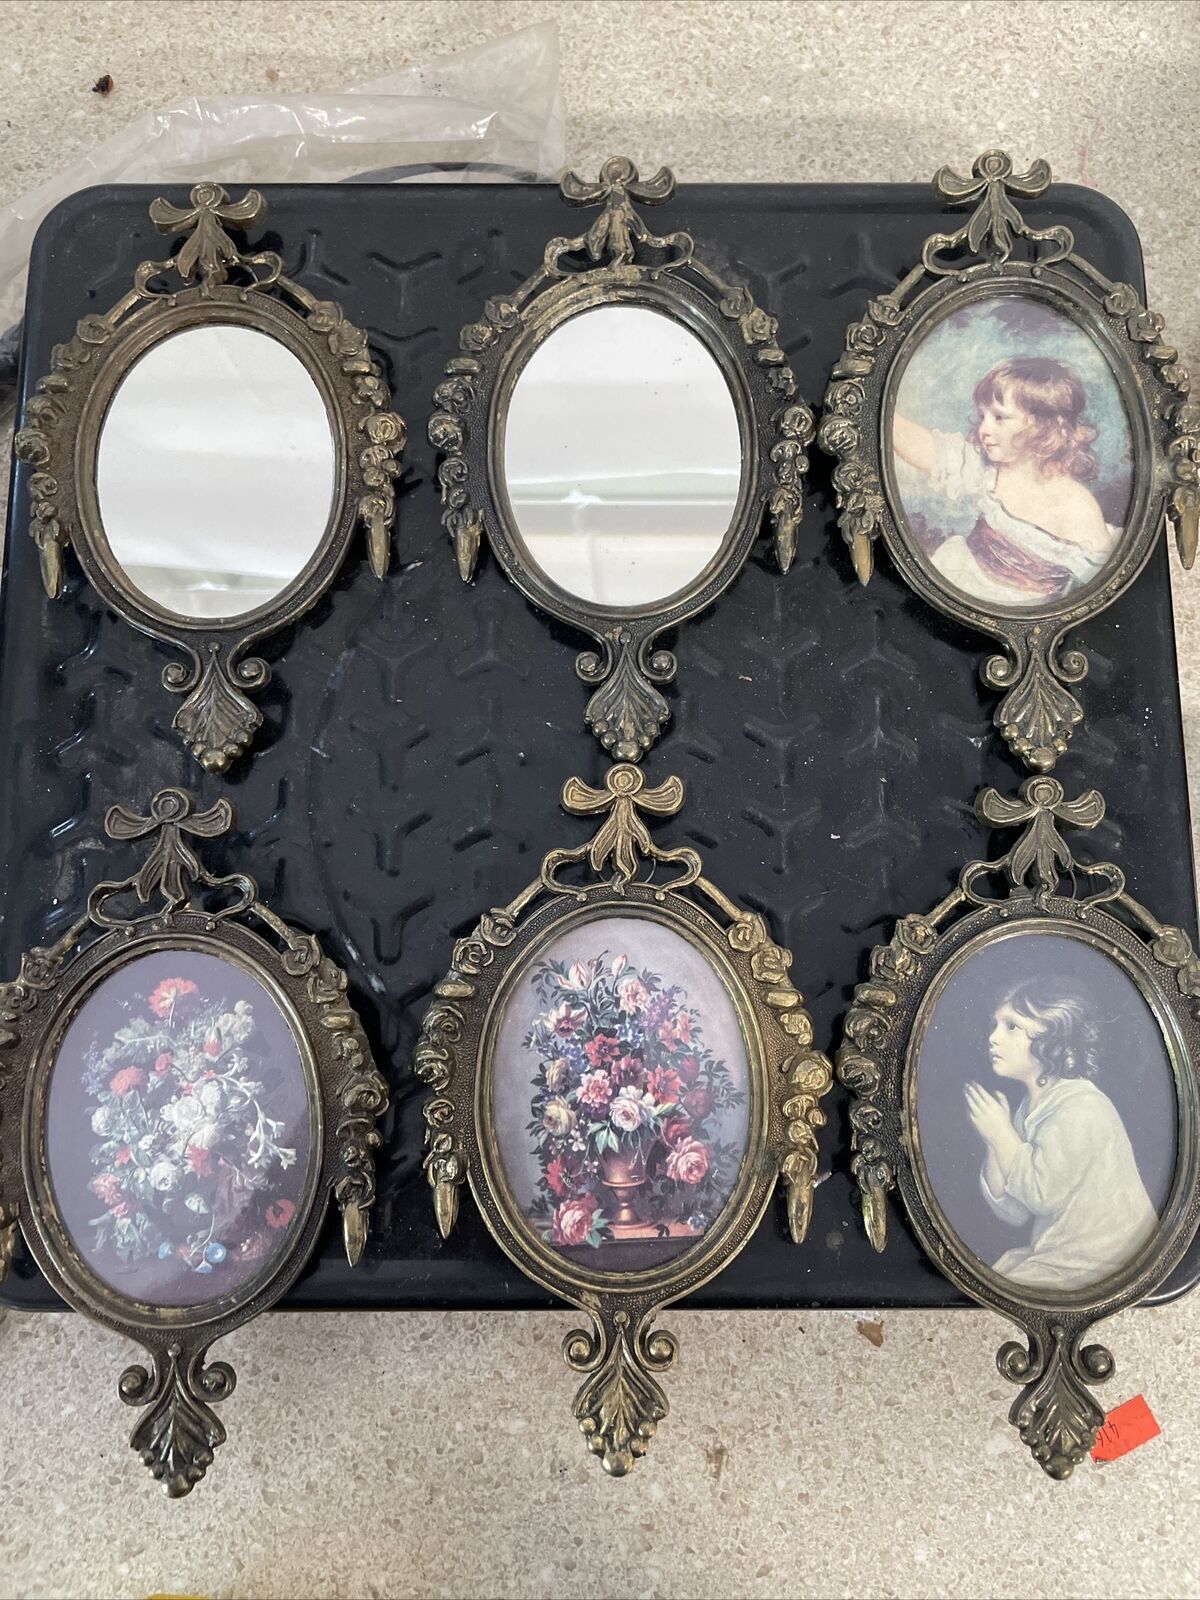 6 Vintage Brass Oval Italian Picture Frames Made in Italy Flower, Mirror , Girl